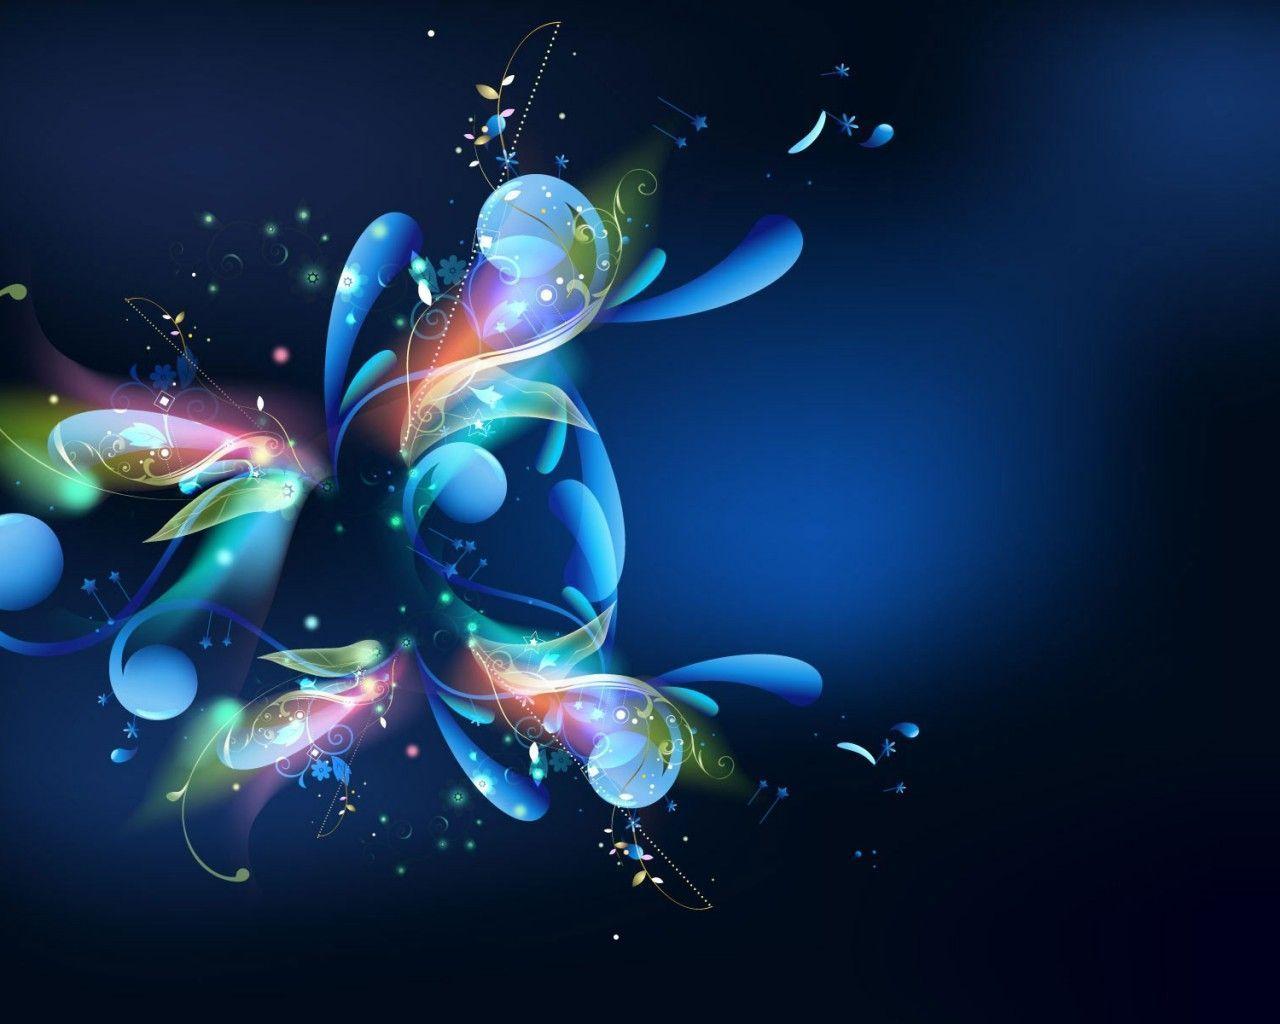 Creative HD Wallpaper for Pc Full Screen Free Download 1920x1080PX